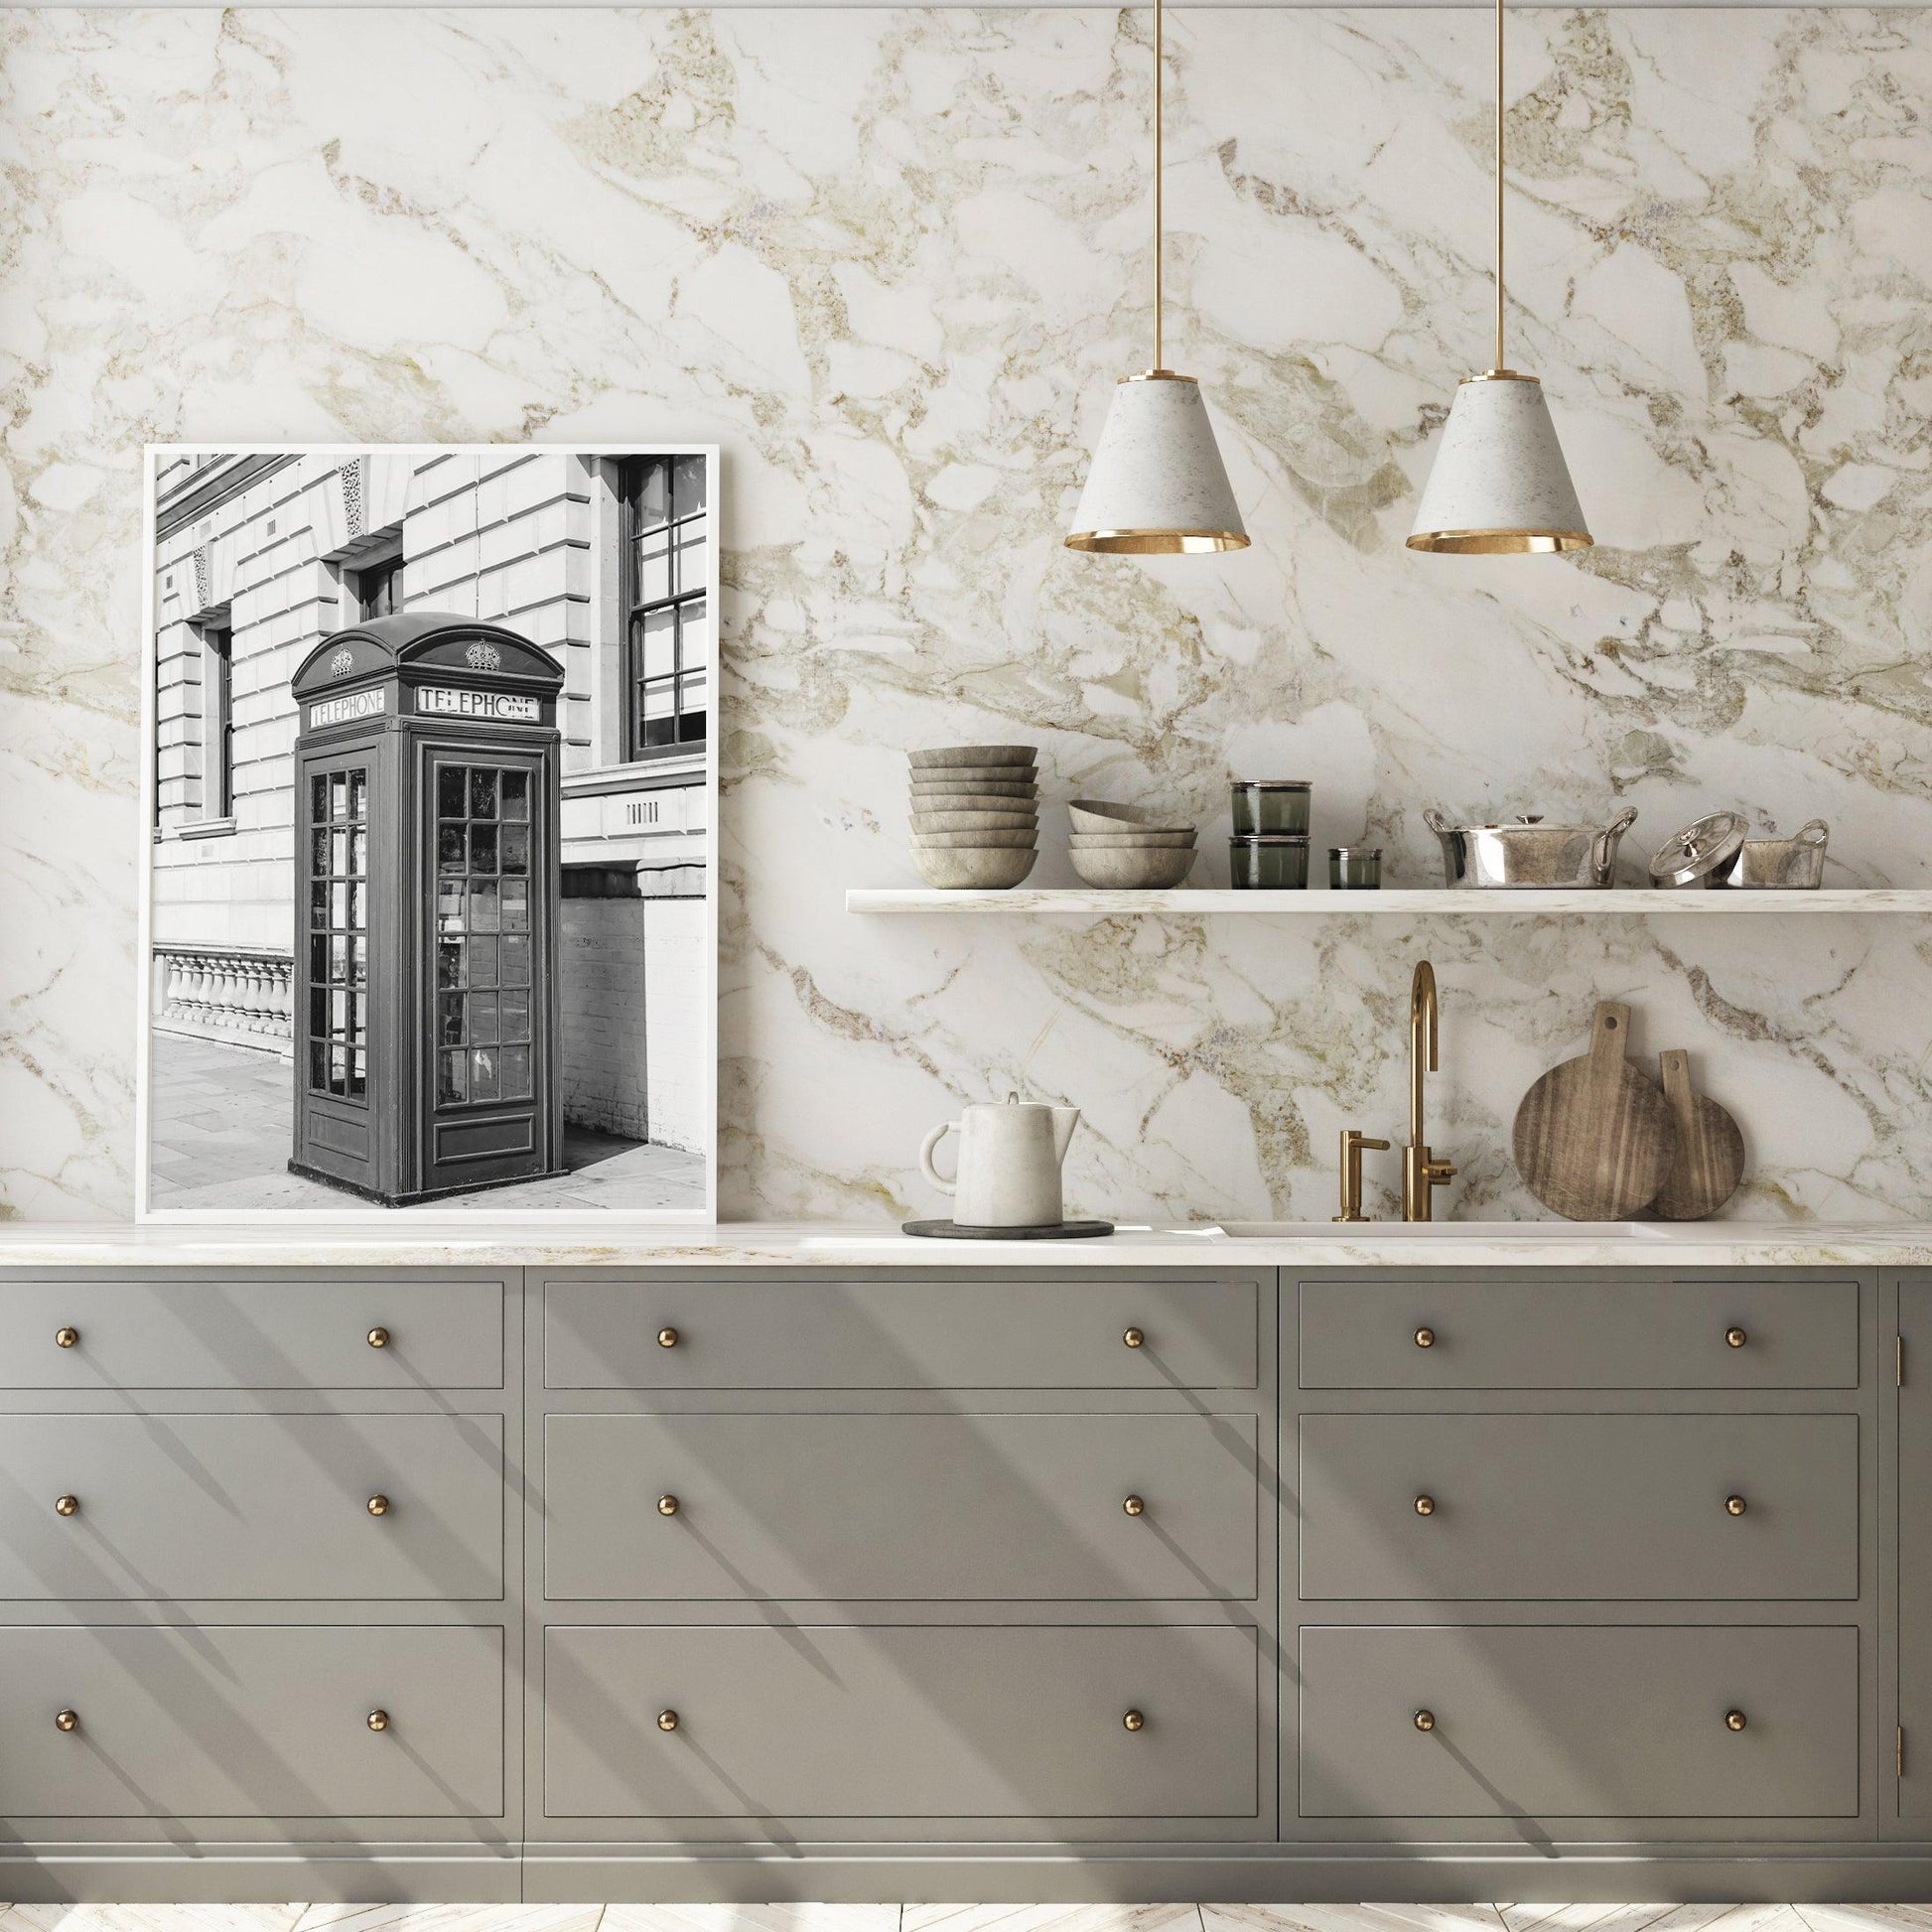 Black and White Telephone Booth II London Print - Departures Print Shop